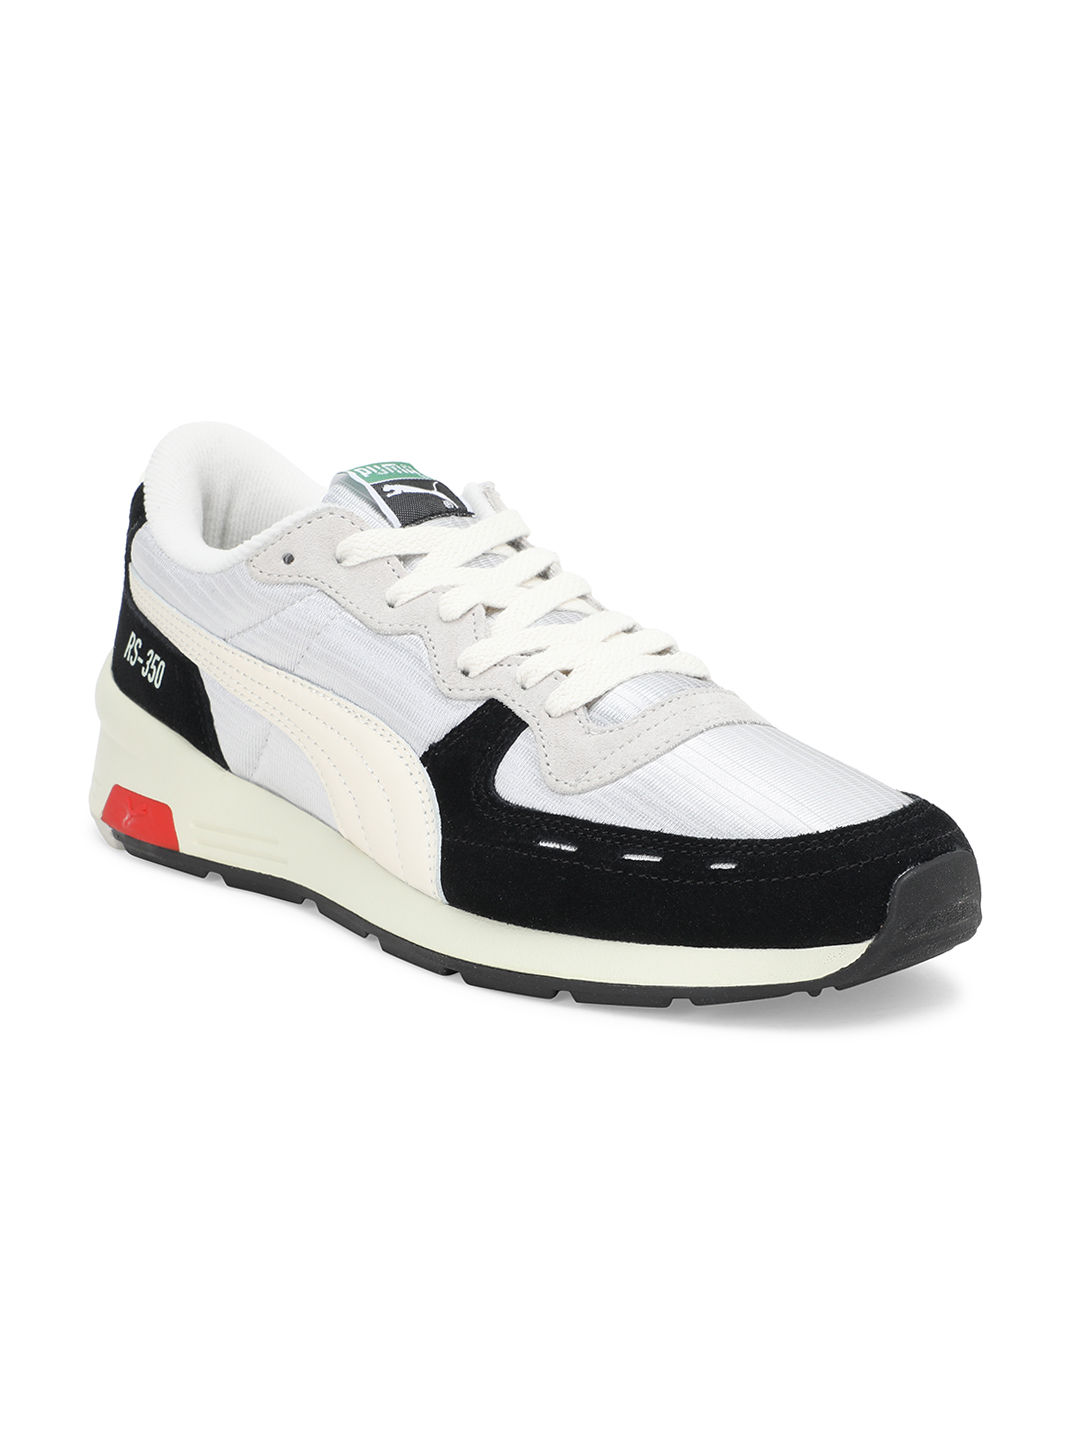 Puma RS-350 OG Casual Shoes - Grey: Buy Puma RS-350 OG Casual Shoes Grey Online Best Price in India | Nykaa